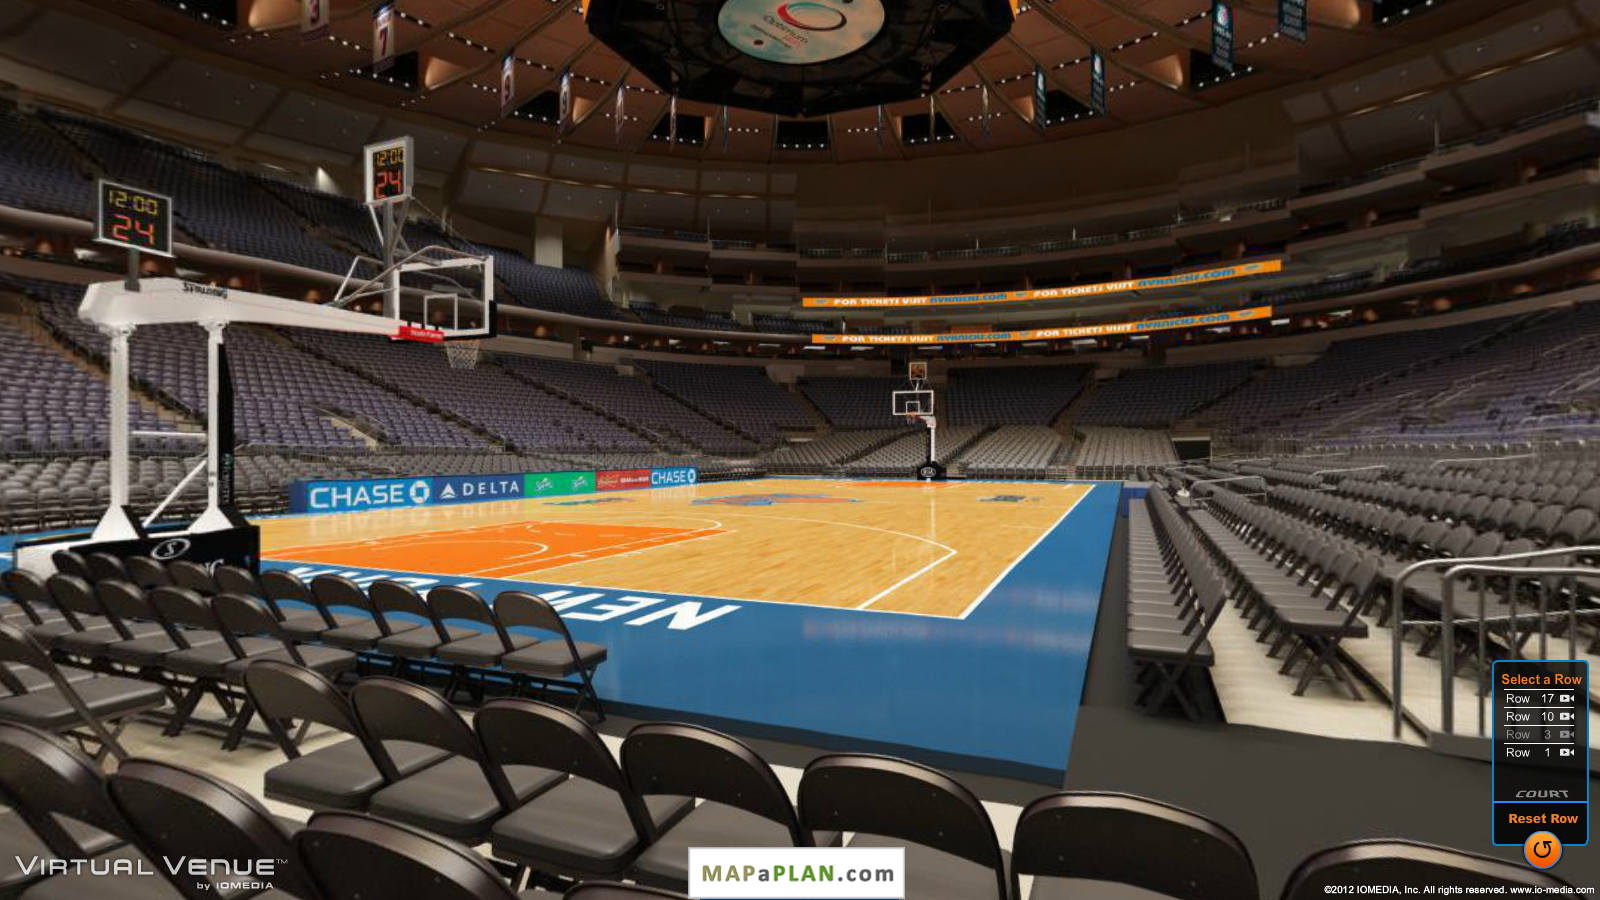 Madison Square Garden seating chart View from section 09